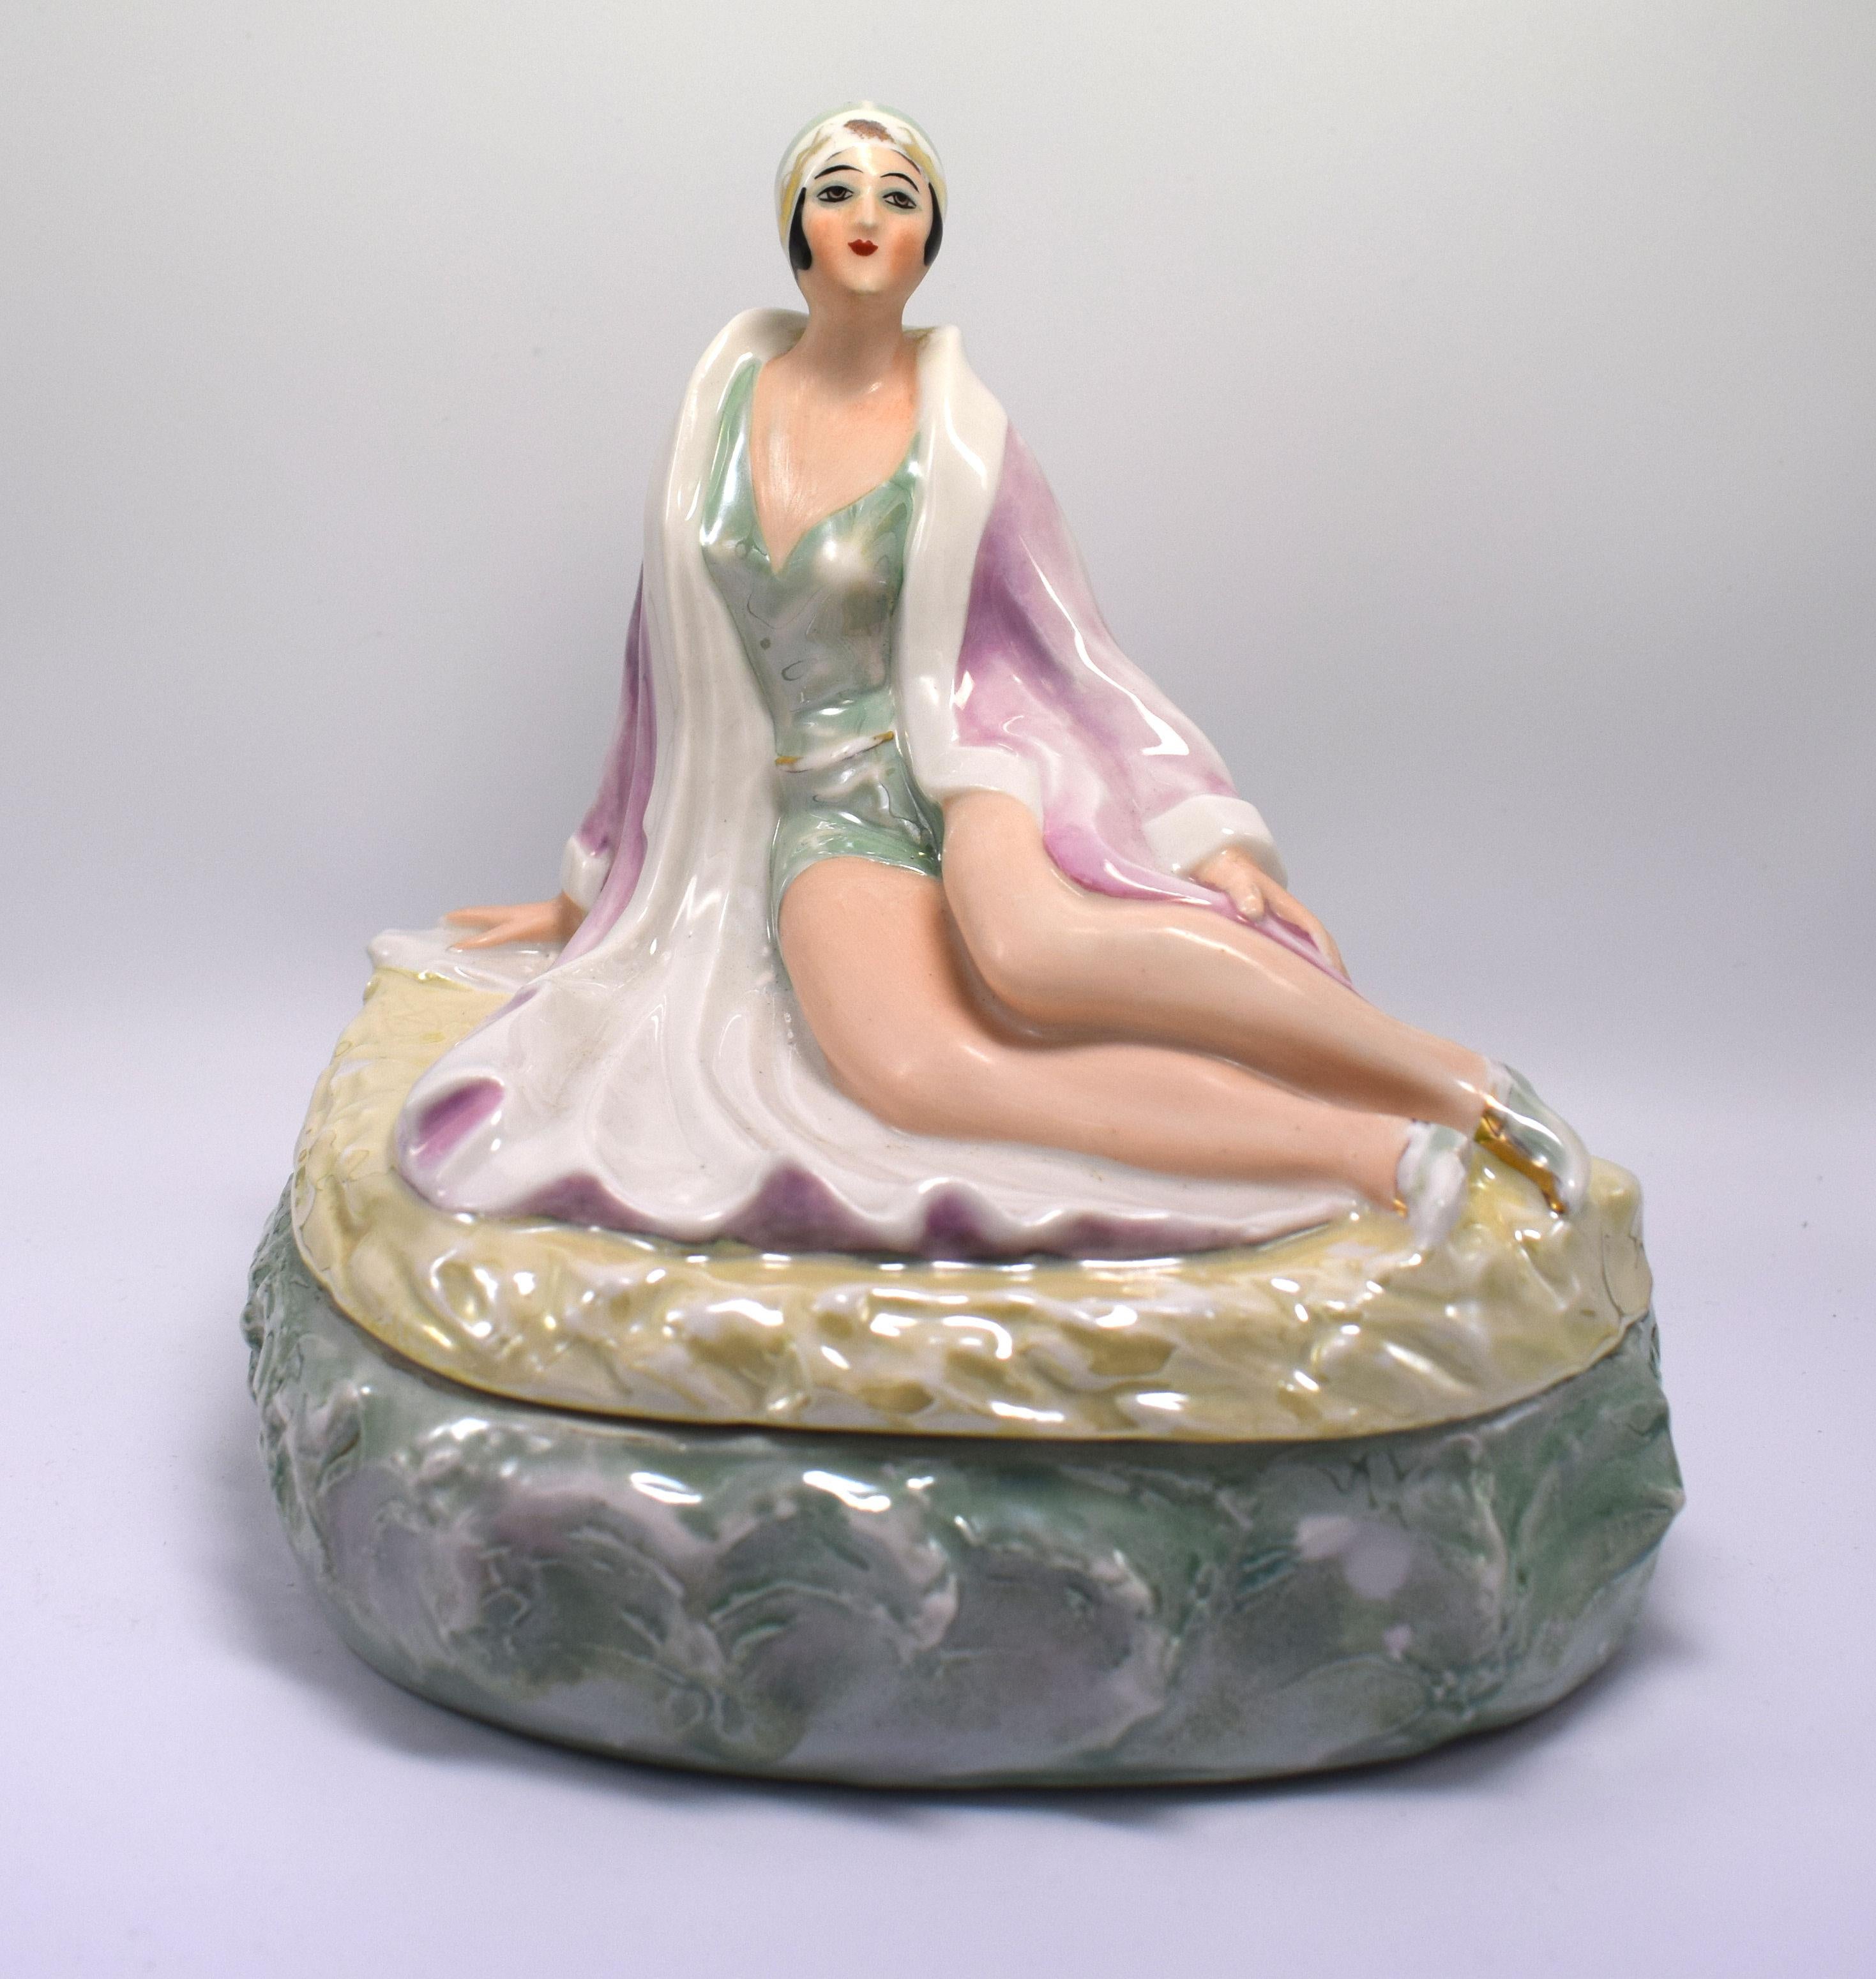 Fantastic original Art Deco porcelain box of a bathing beauty flapper girl. Made of porcelain and finished with lustre glazes, she has an exquisite face and is modelled as if lying on a beach (the lid) surrounded by waves (the base of the box).